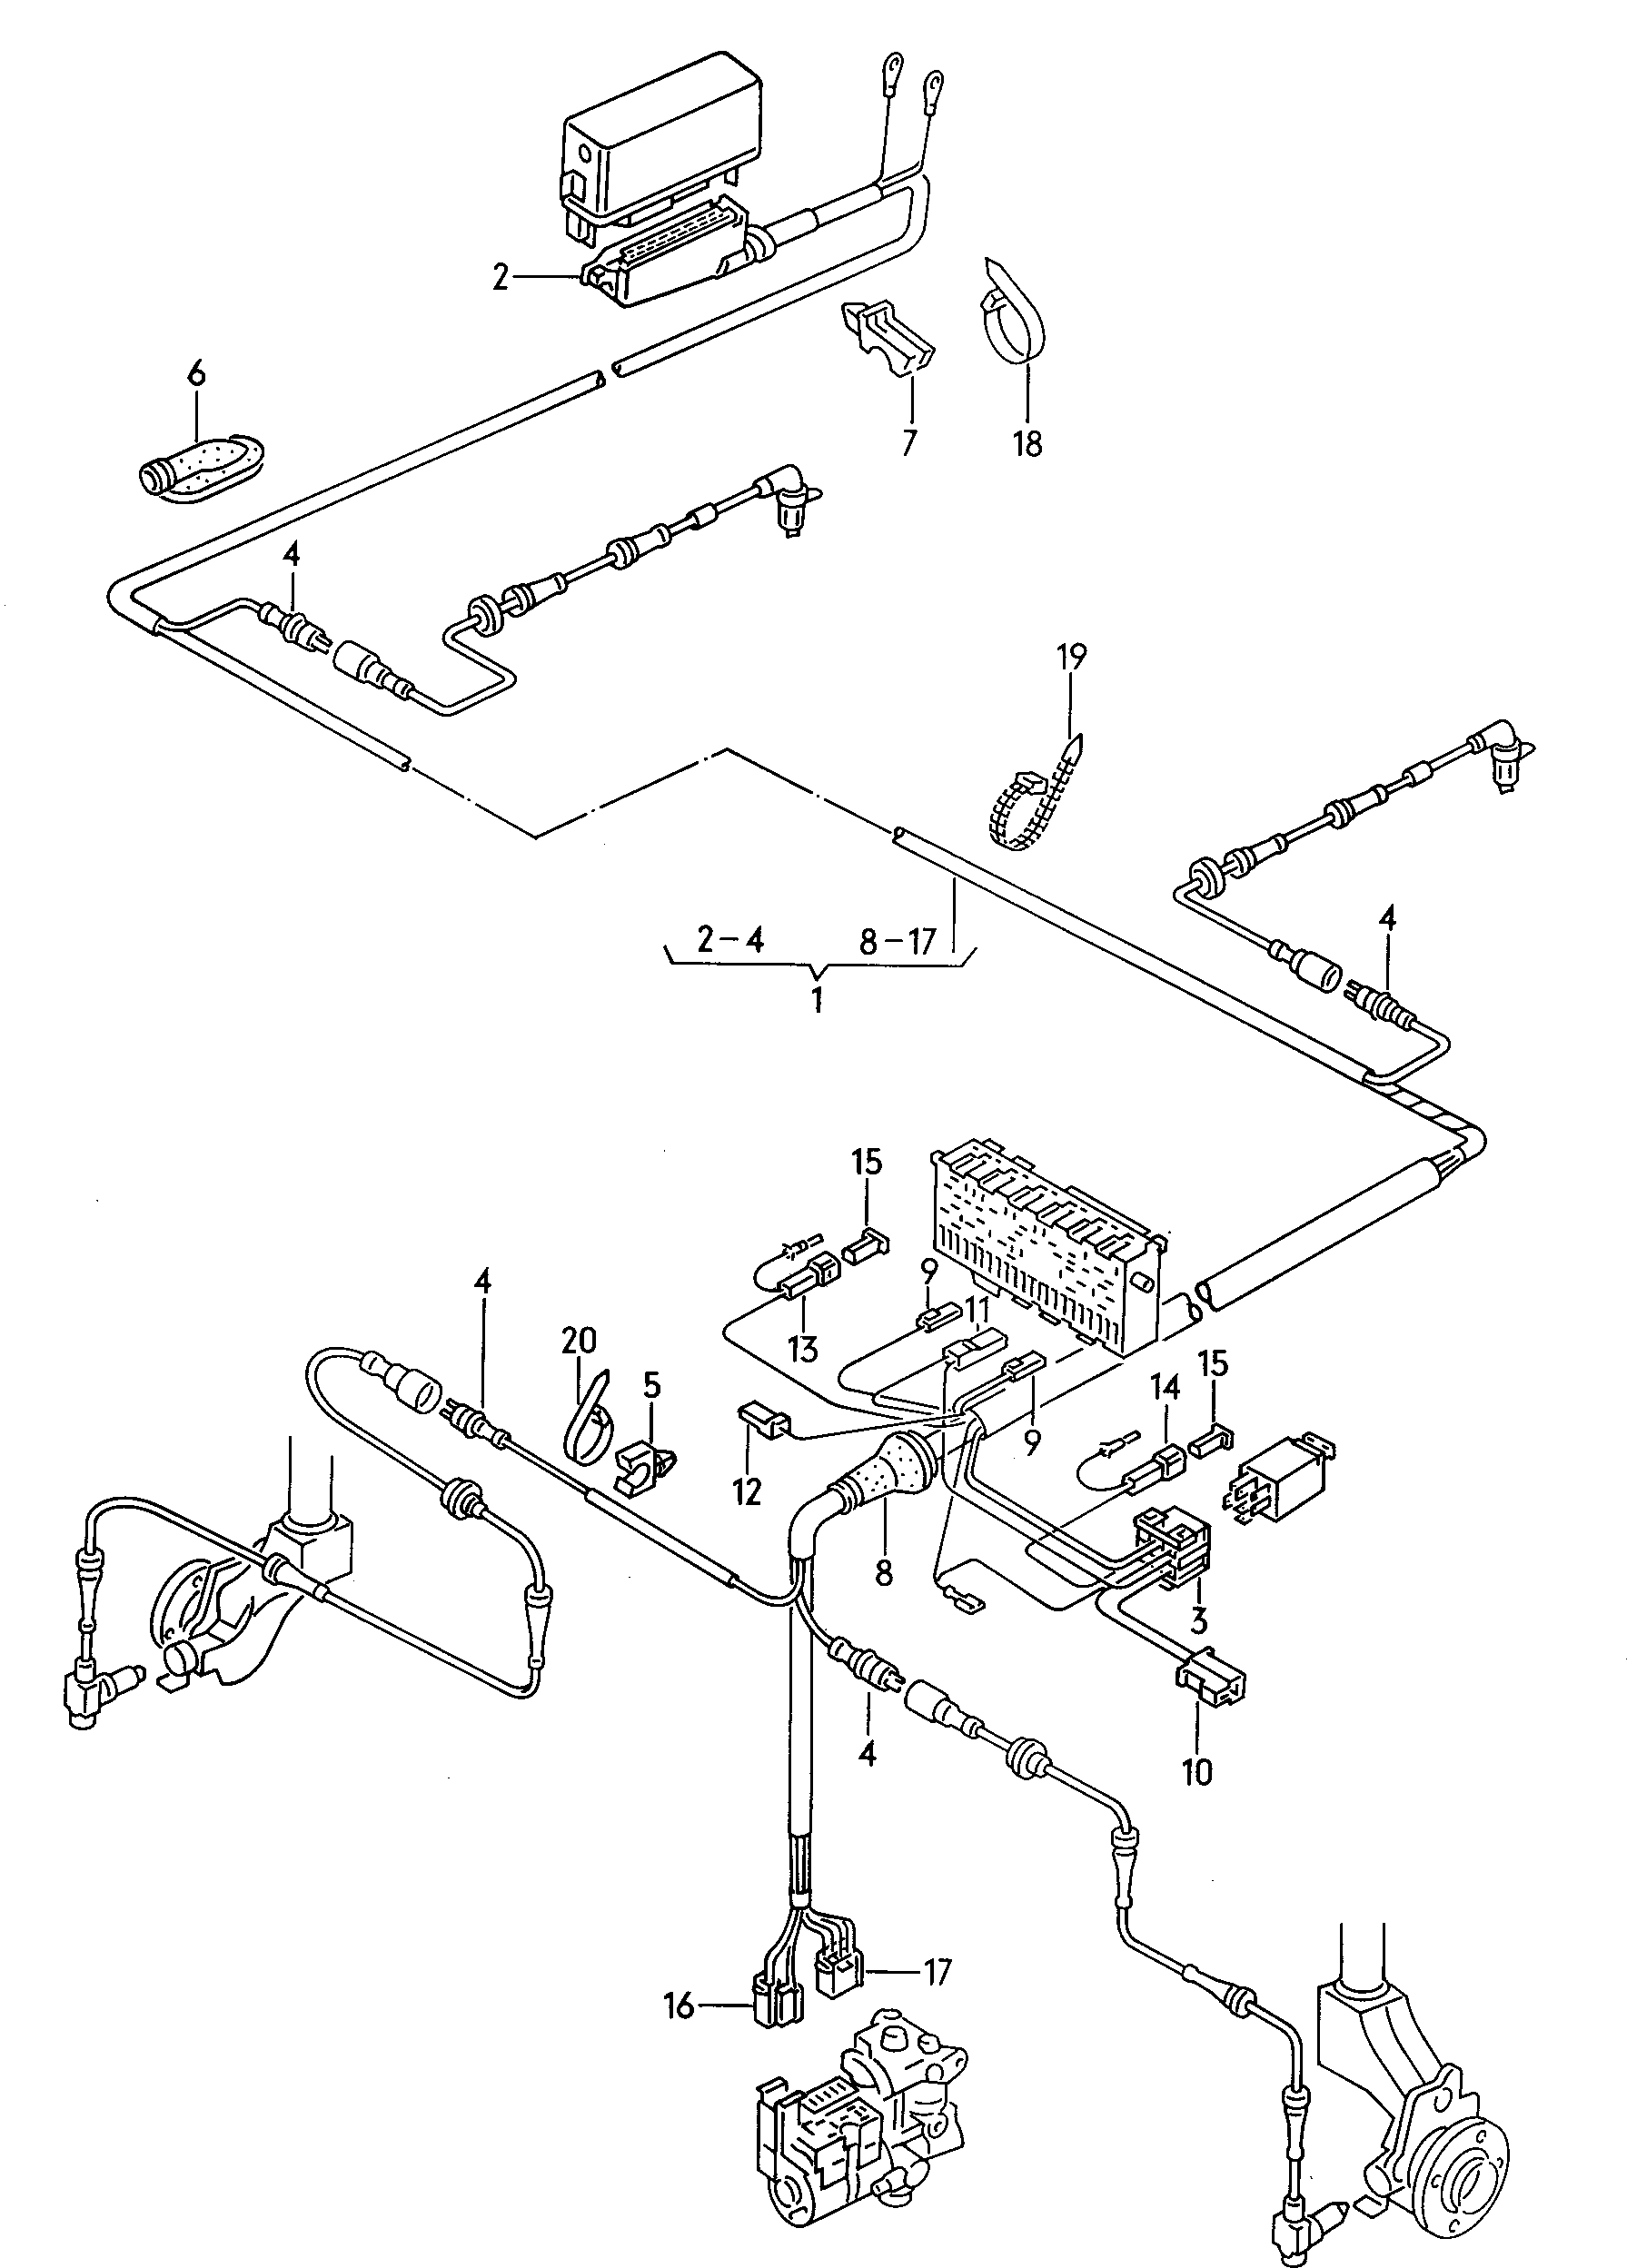 wiring harness for anti-lock<br>brakesystem             -abs-             see illustration:  128-060 - Audi Coupe - aco